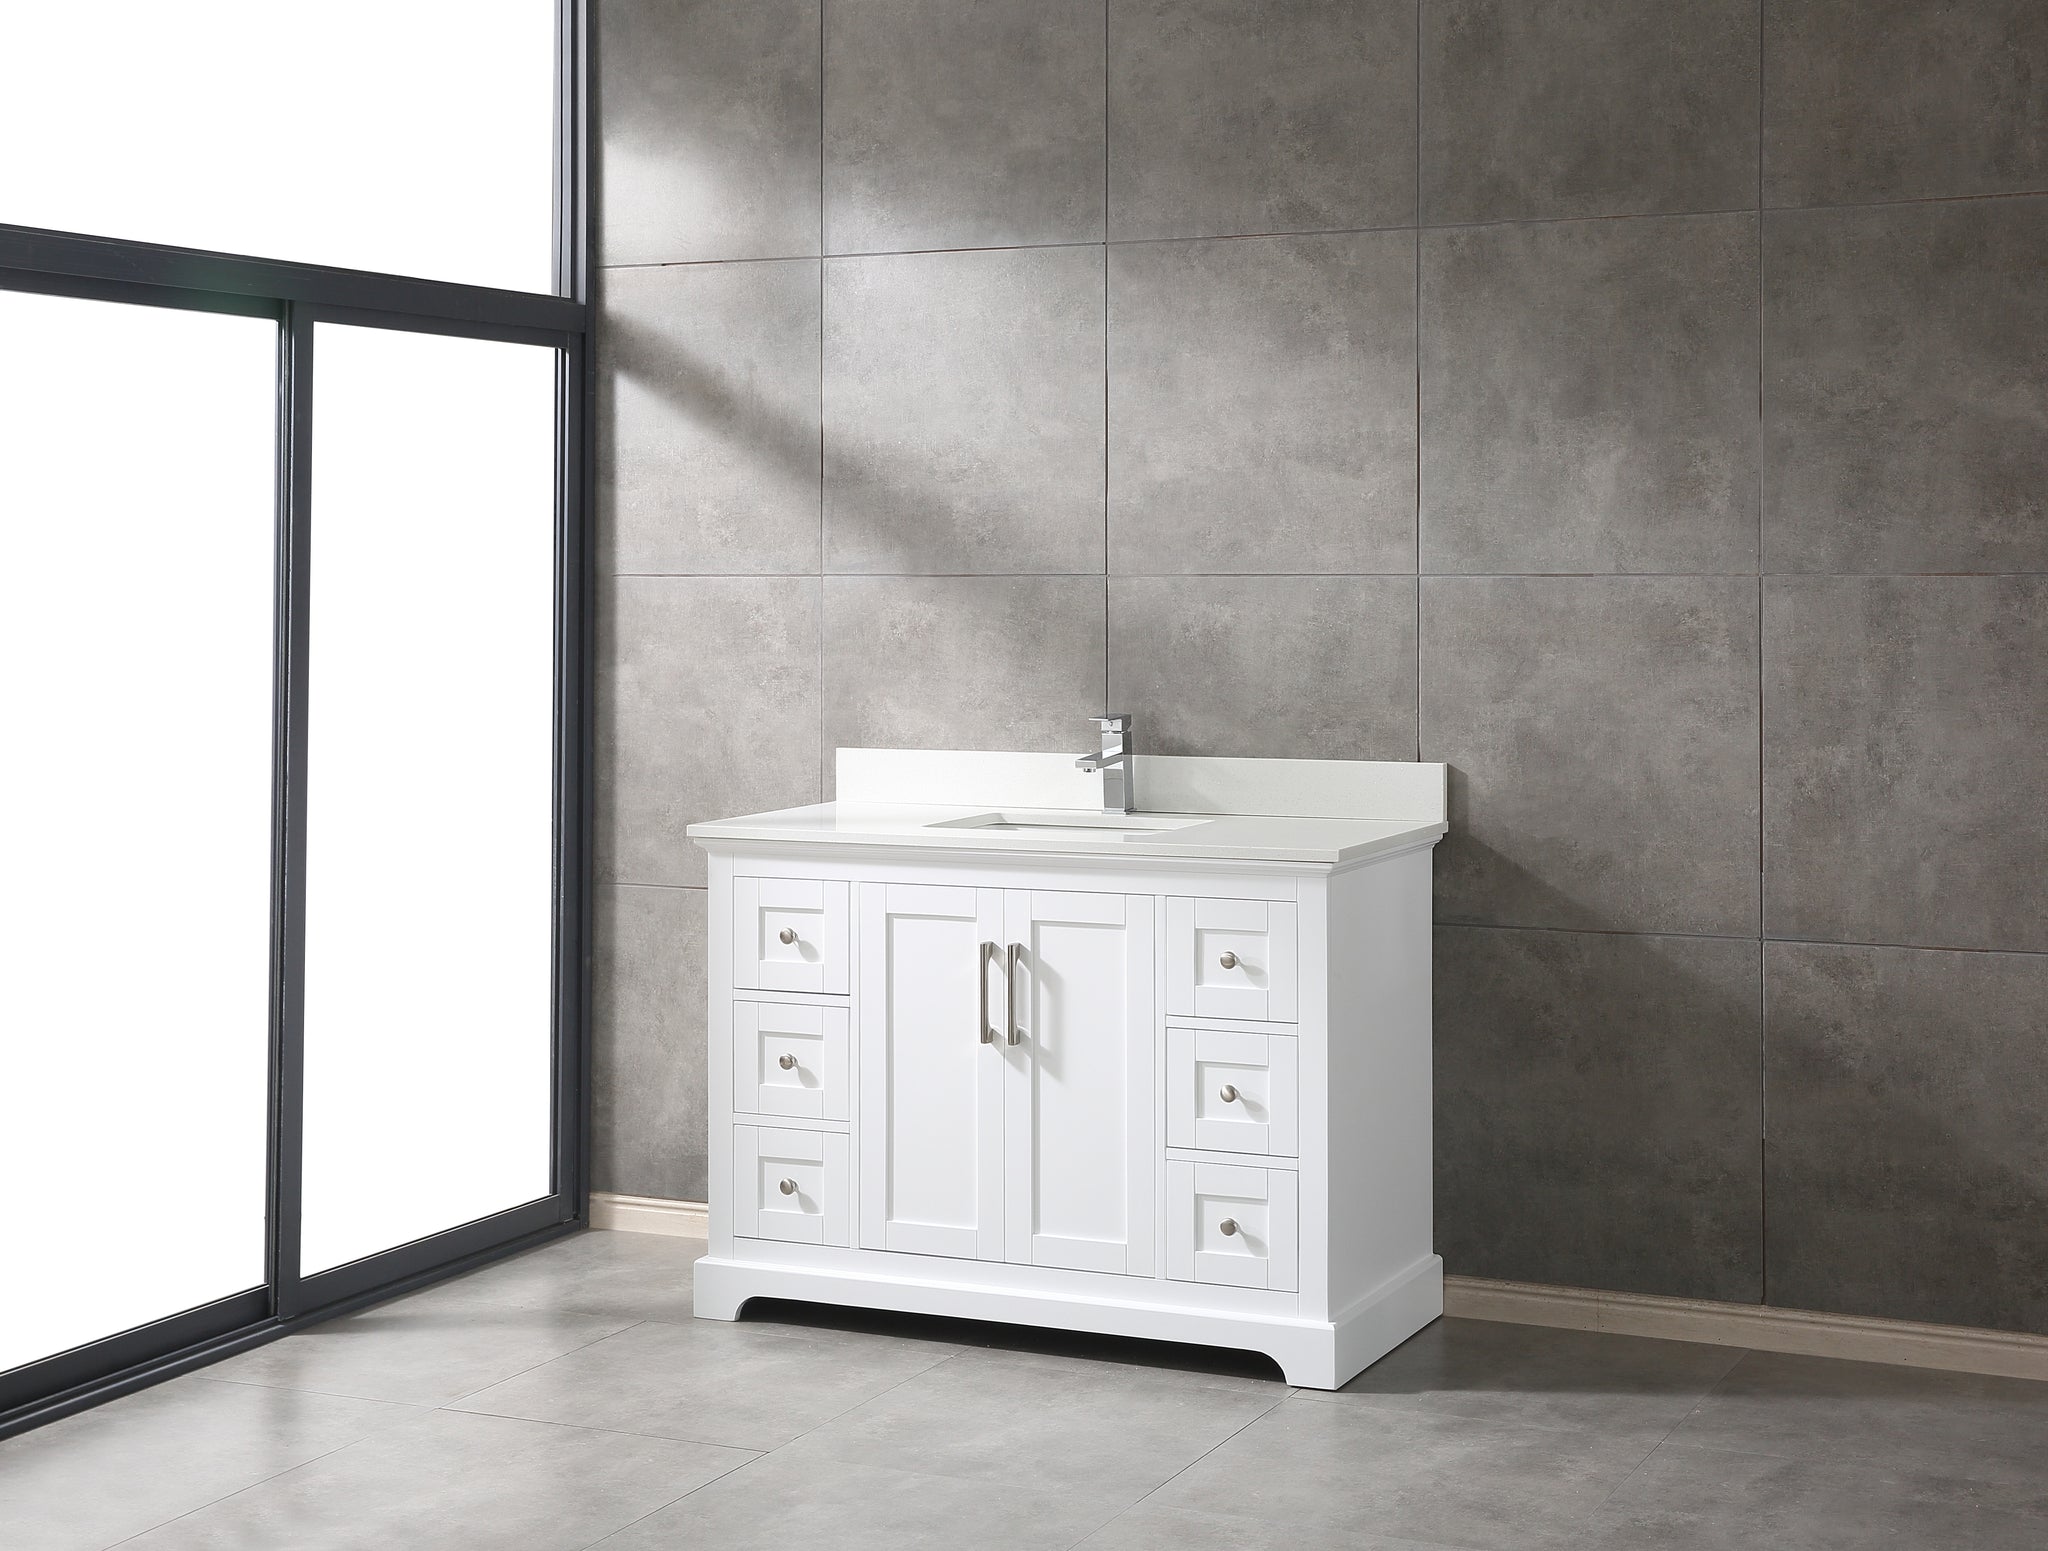 News What are the standard sizes for bathroom vanity ...